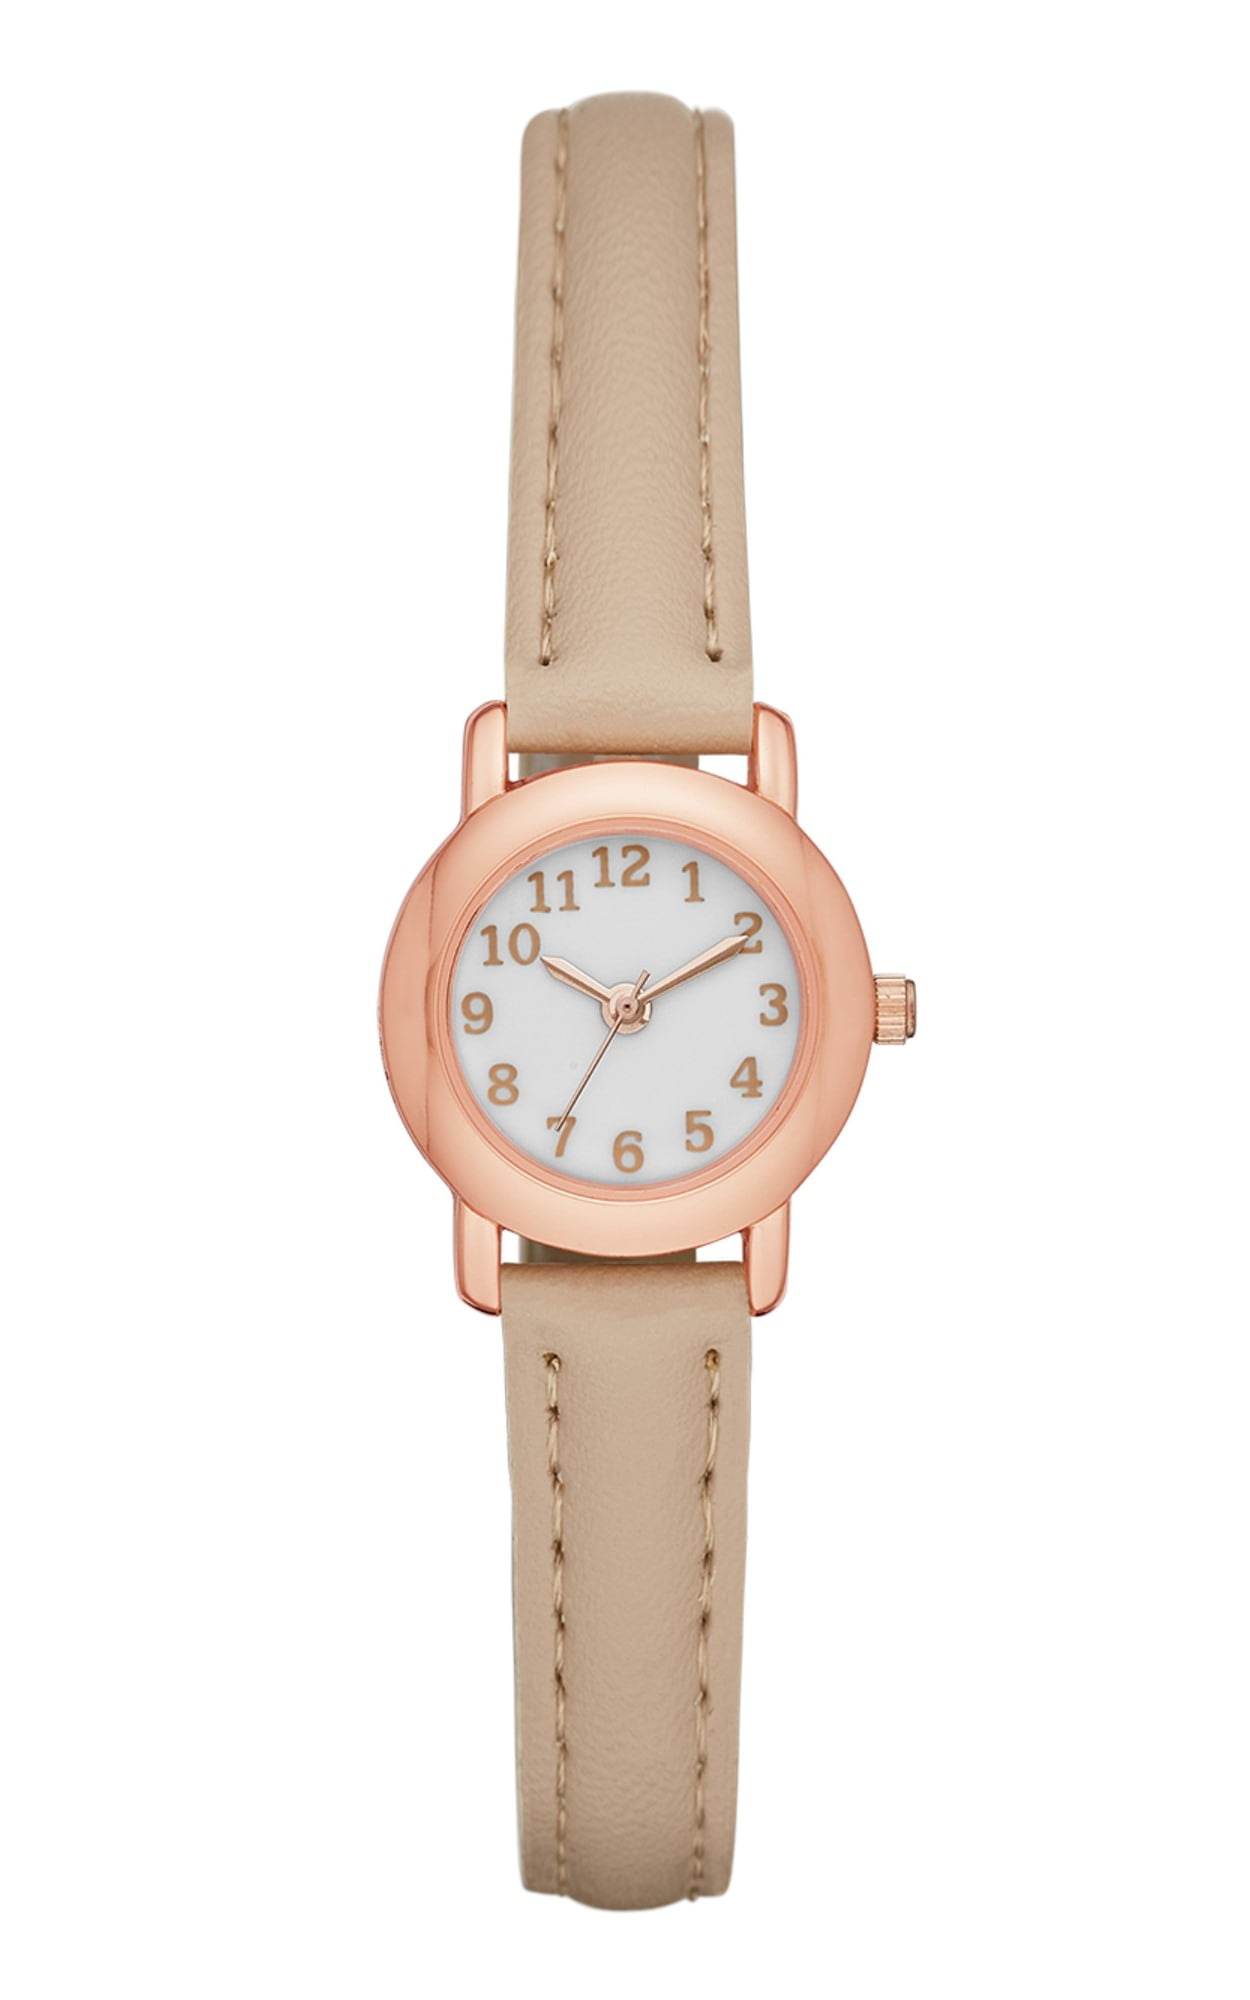 Women's Casual Watch with a Blush Vegan Leather Strap and Easy Read ...